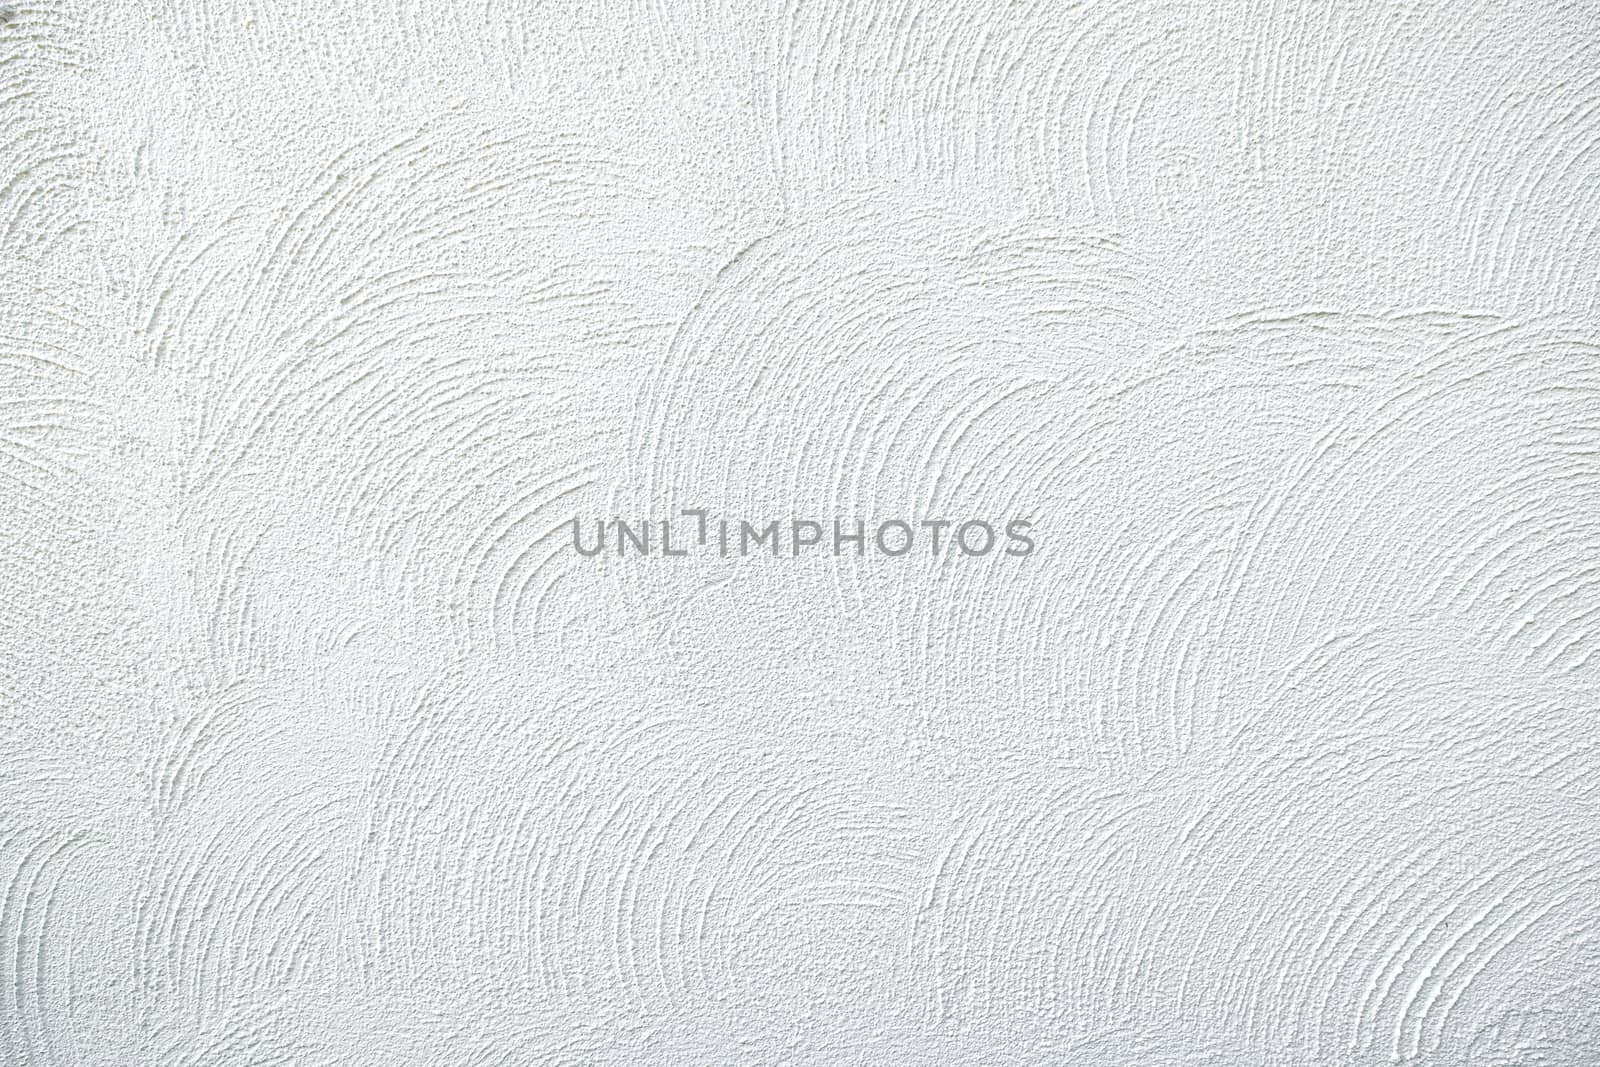 Plaster textured background by Nawoot